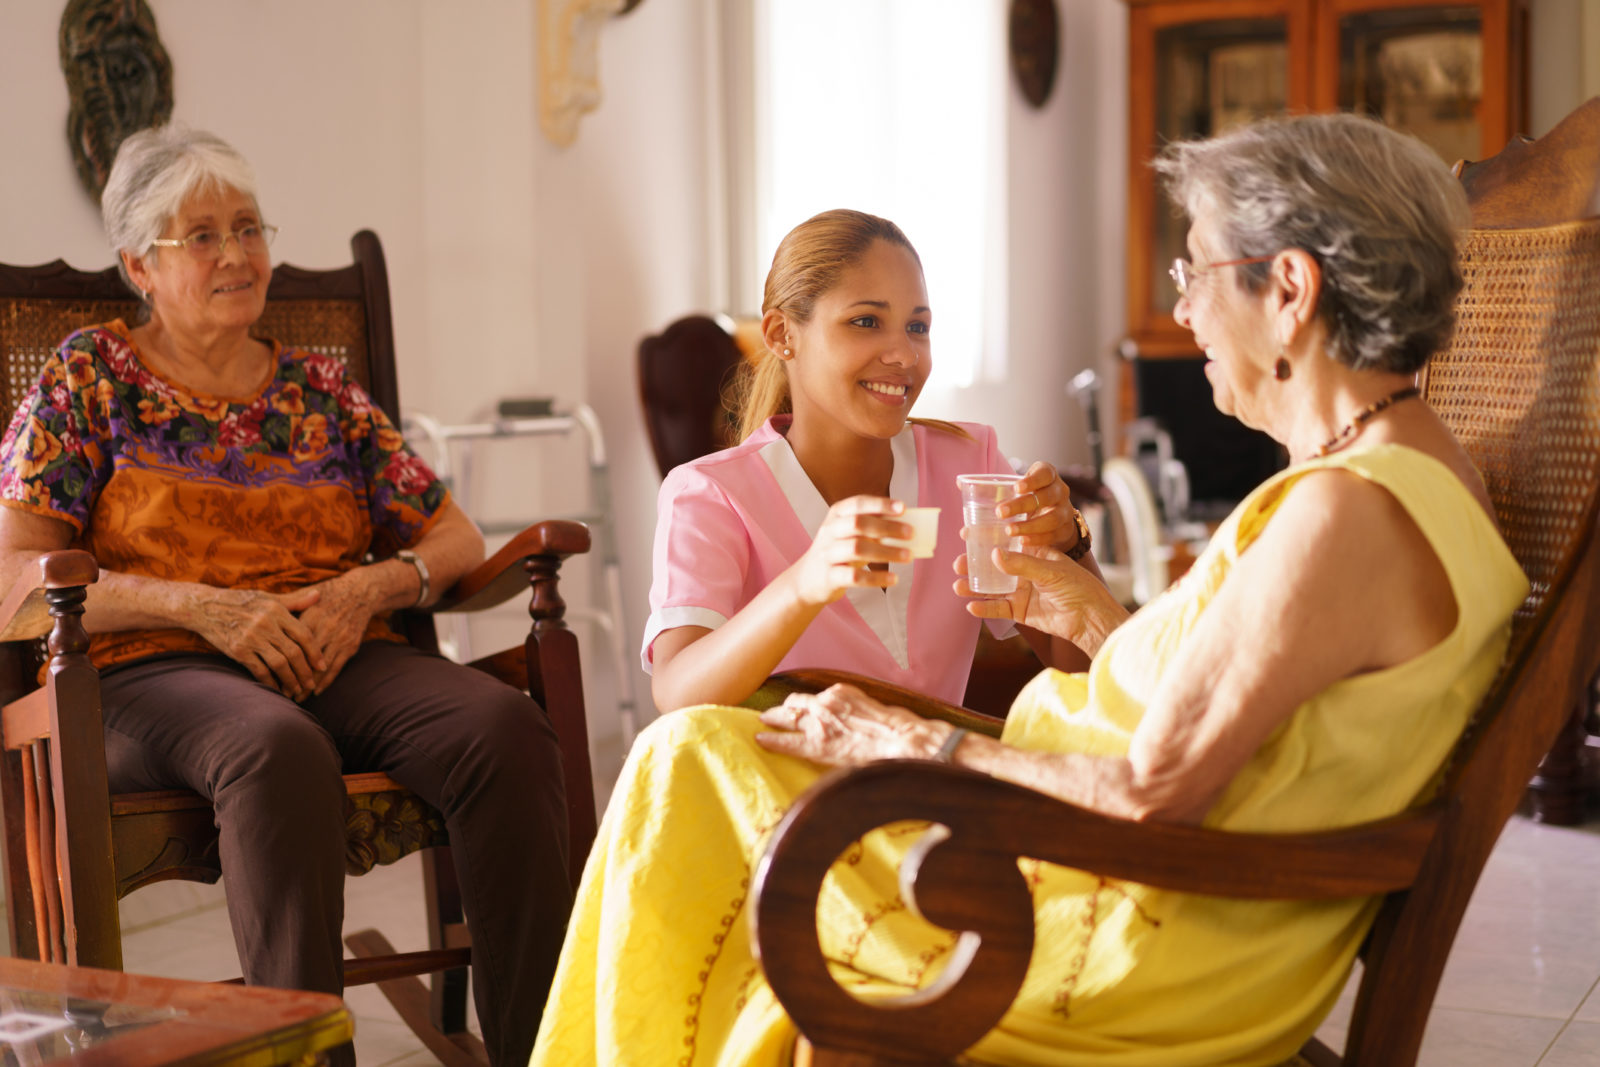 Old people in geriatric hospice: young attractive hispanic woman working as nurse helps a senior woman. She gives a water glass and prescription medicine to the aged patient